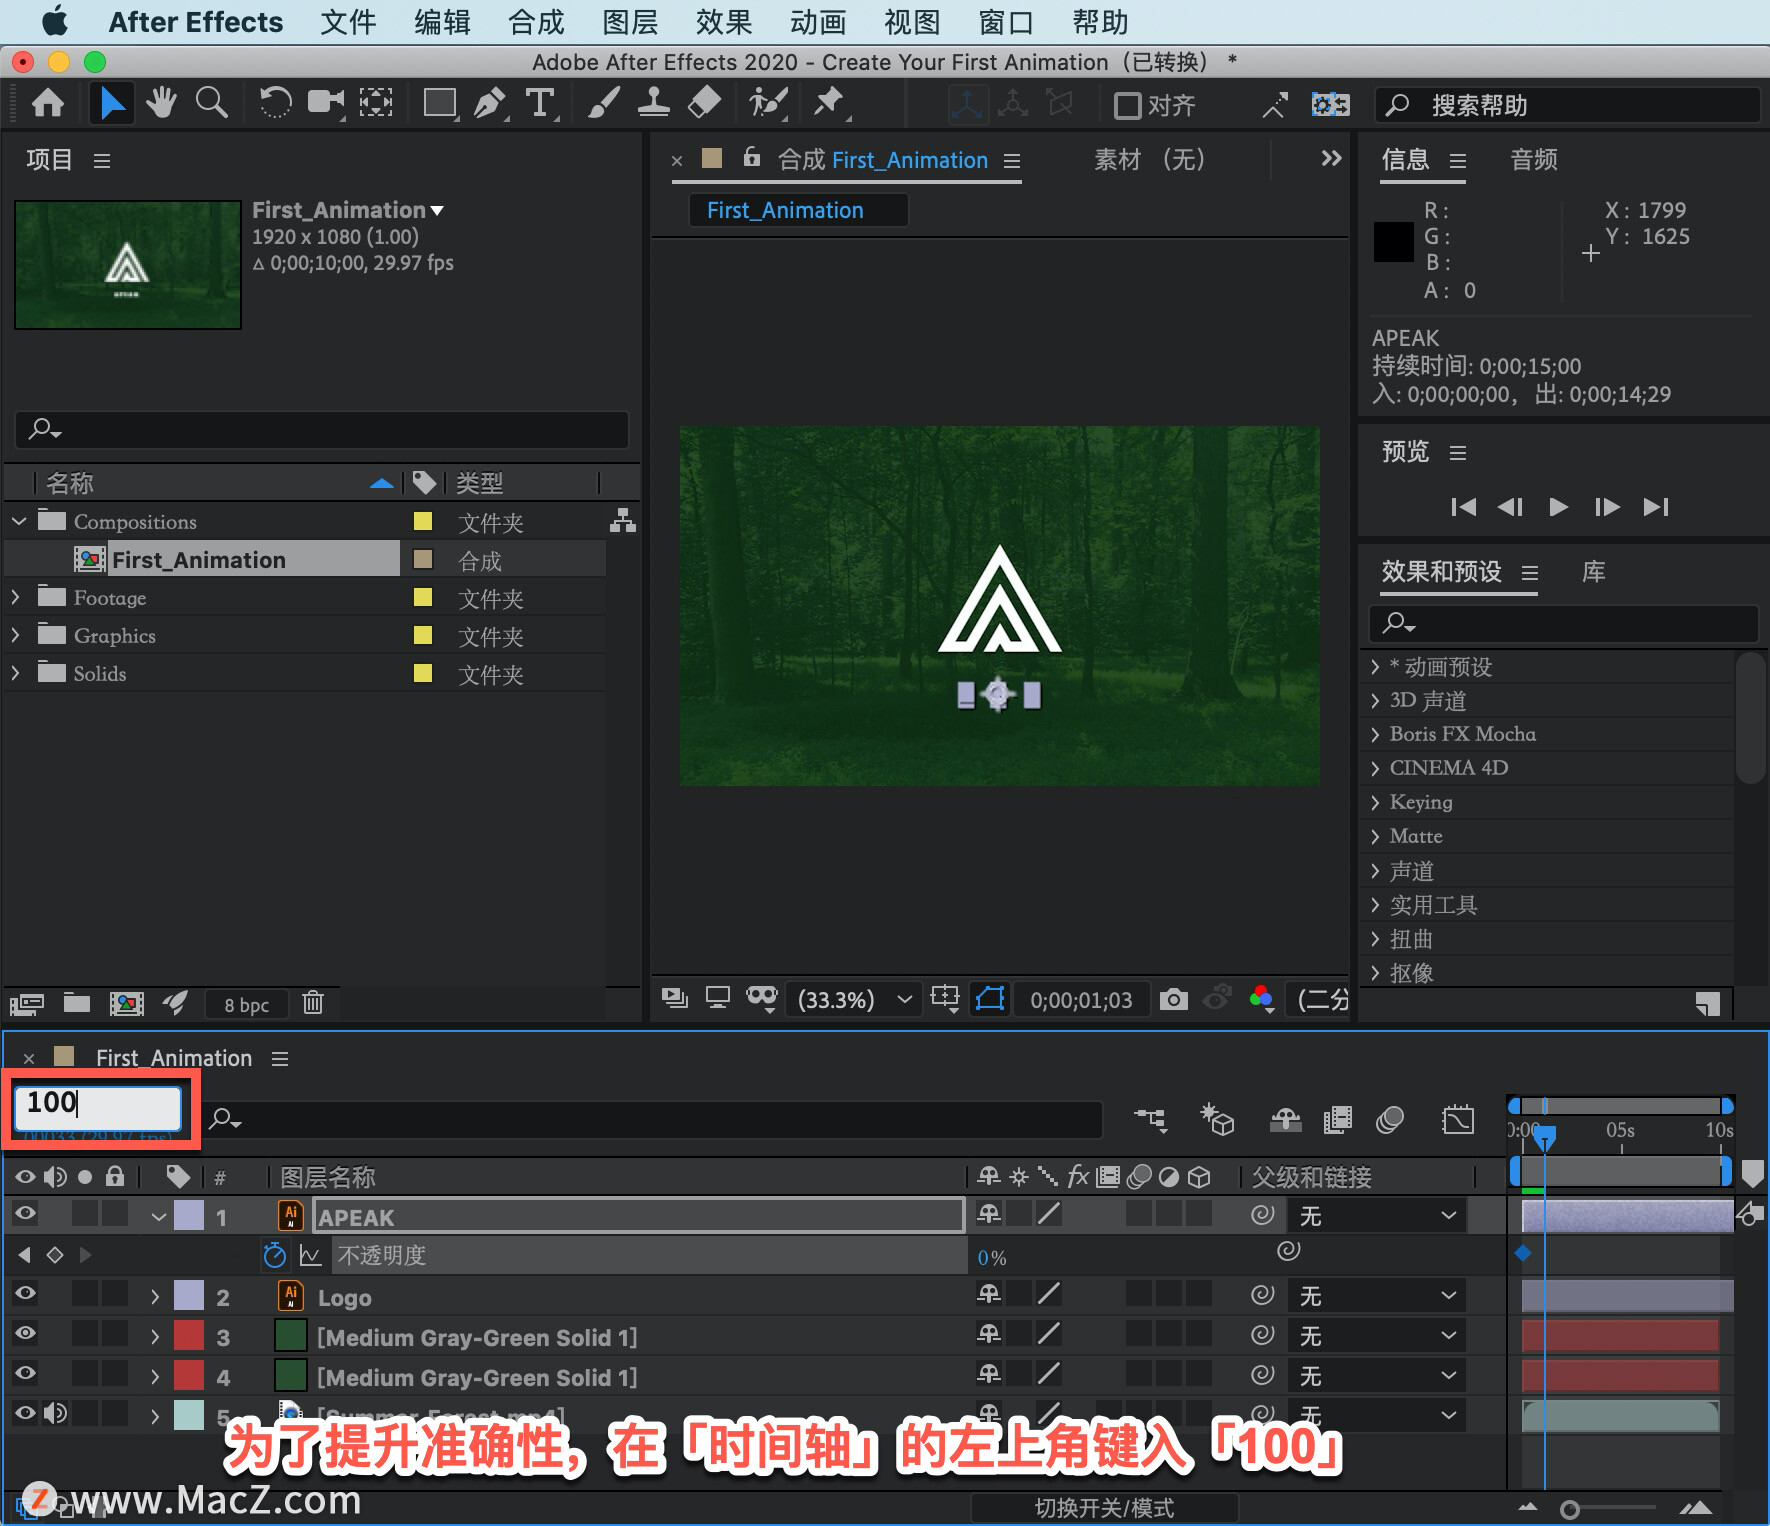 After Effects 教程「8」，如何在 After Effects 中设置关键帧？